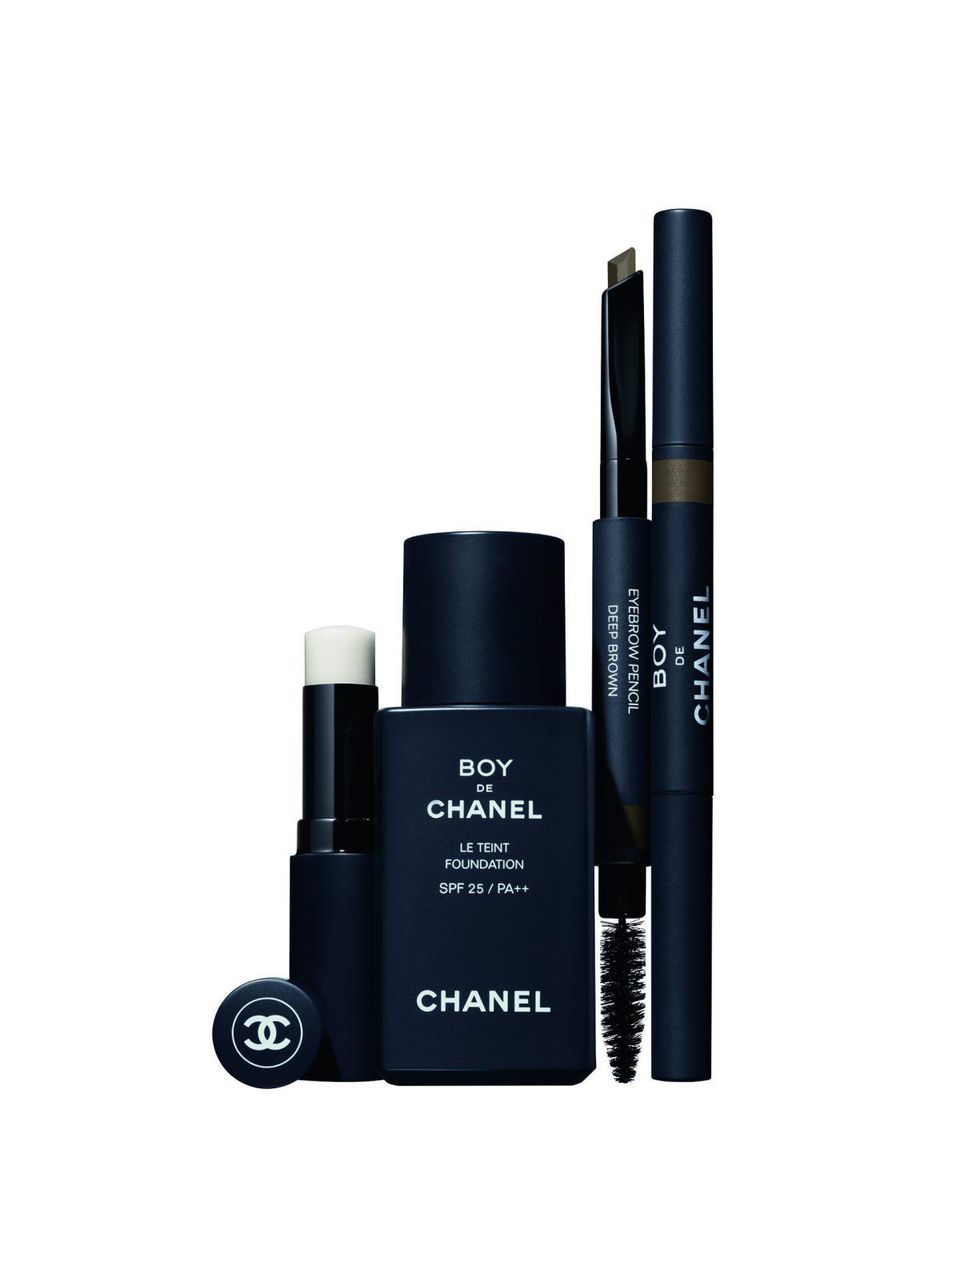 Chanel introduces three-product makeup range for men